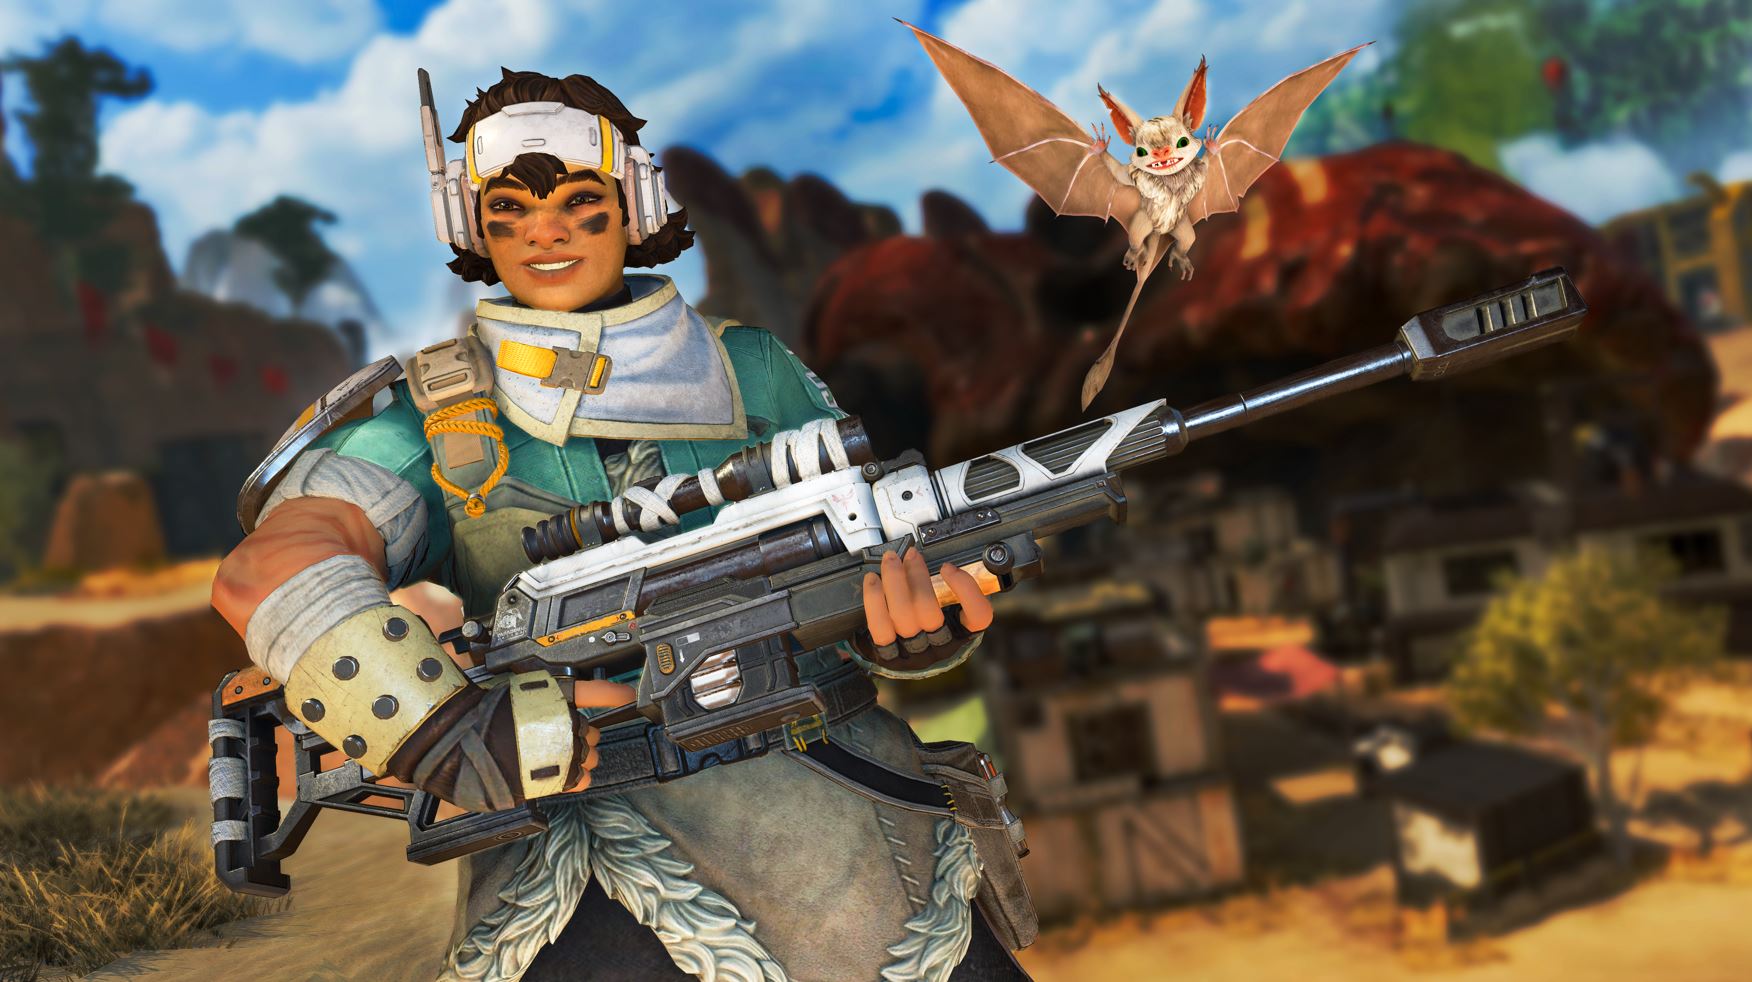 Apex Legends’ newest character is a deadly sniper with an adorable bat pal, End Game Boss, endgameboss.com